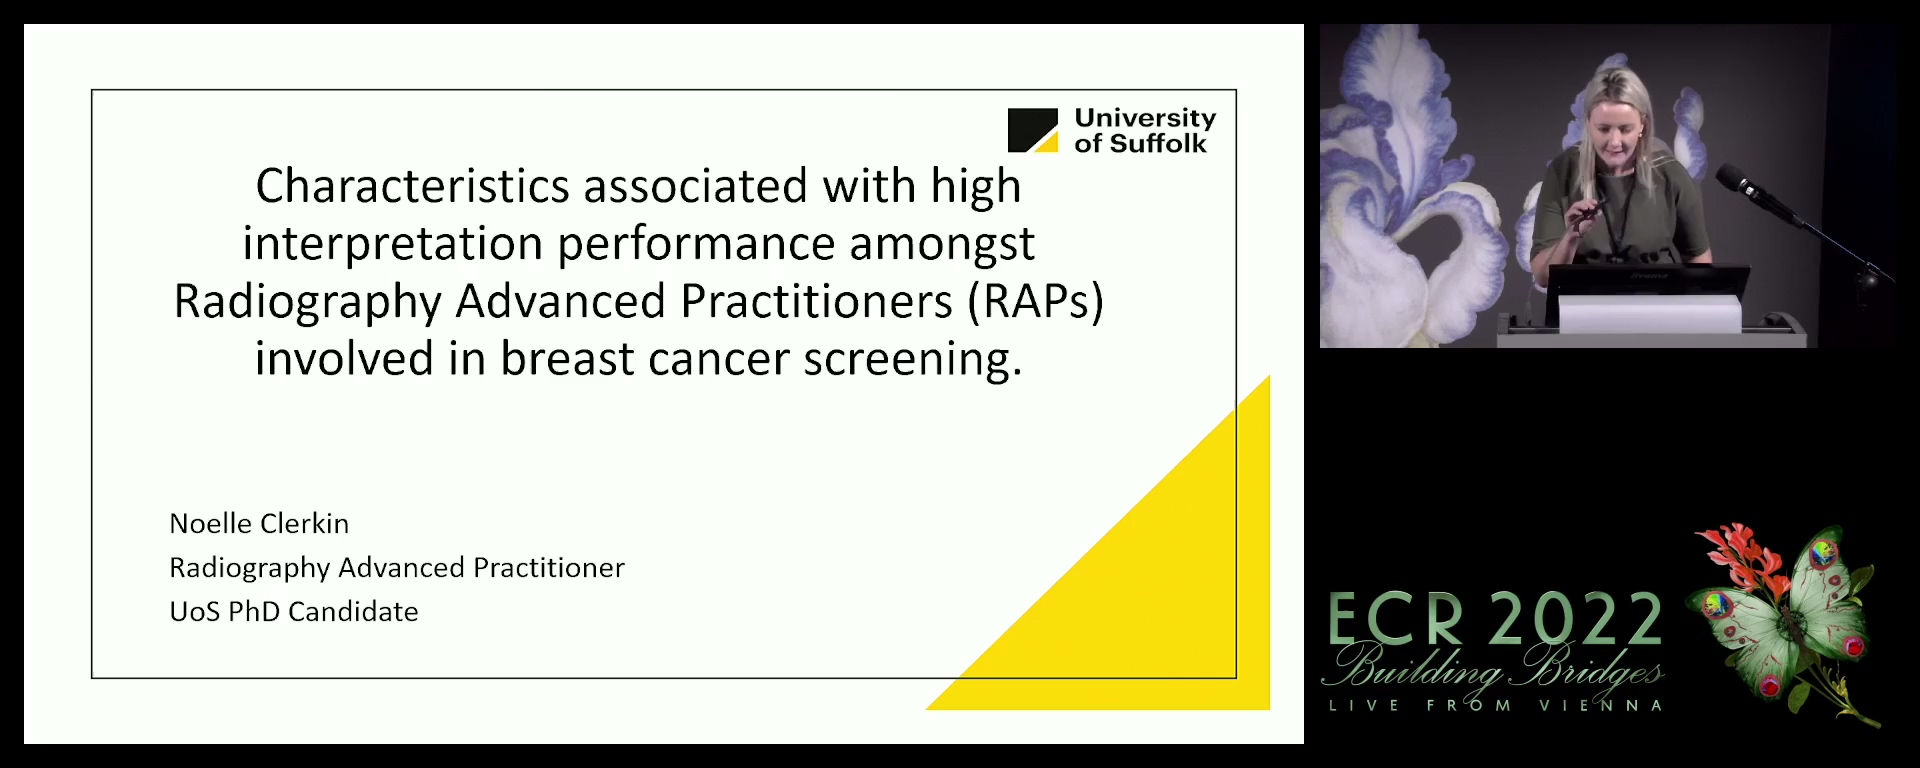 Characteristics associated with high interpretation performance amongst radiography advanced practitioners (RAPs) involved in breast cancer screening - Noelle Lay, Craigavon / UK